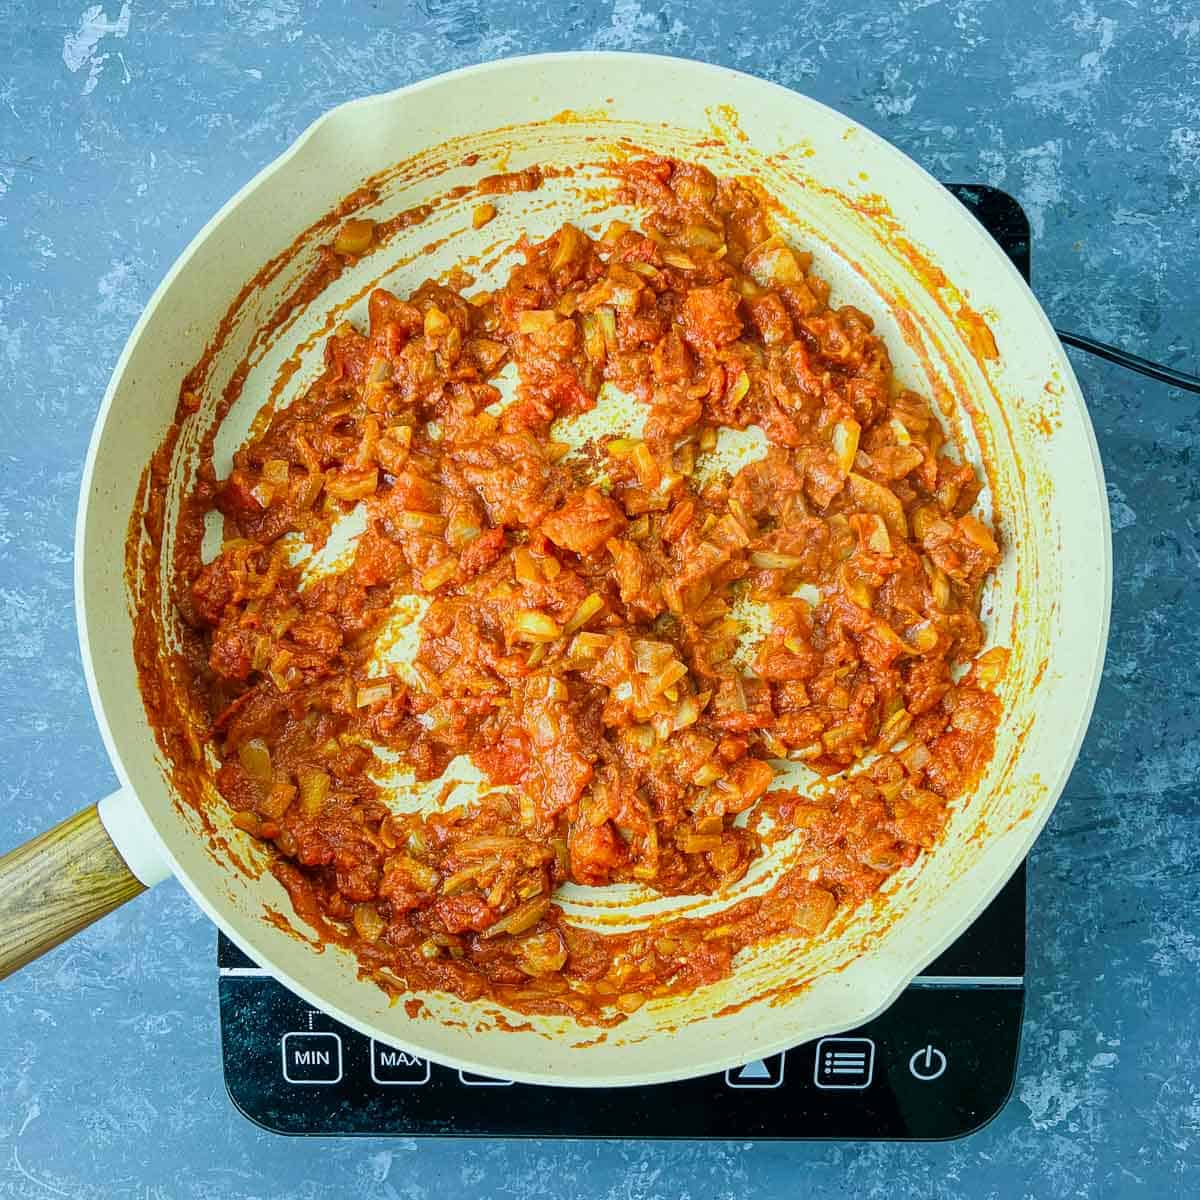 Cooked tomato and spices in a frying pan.